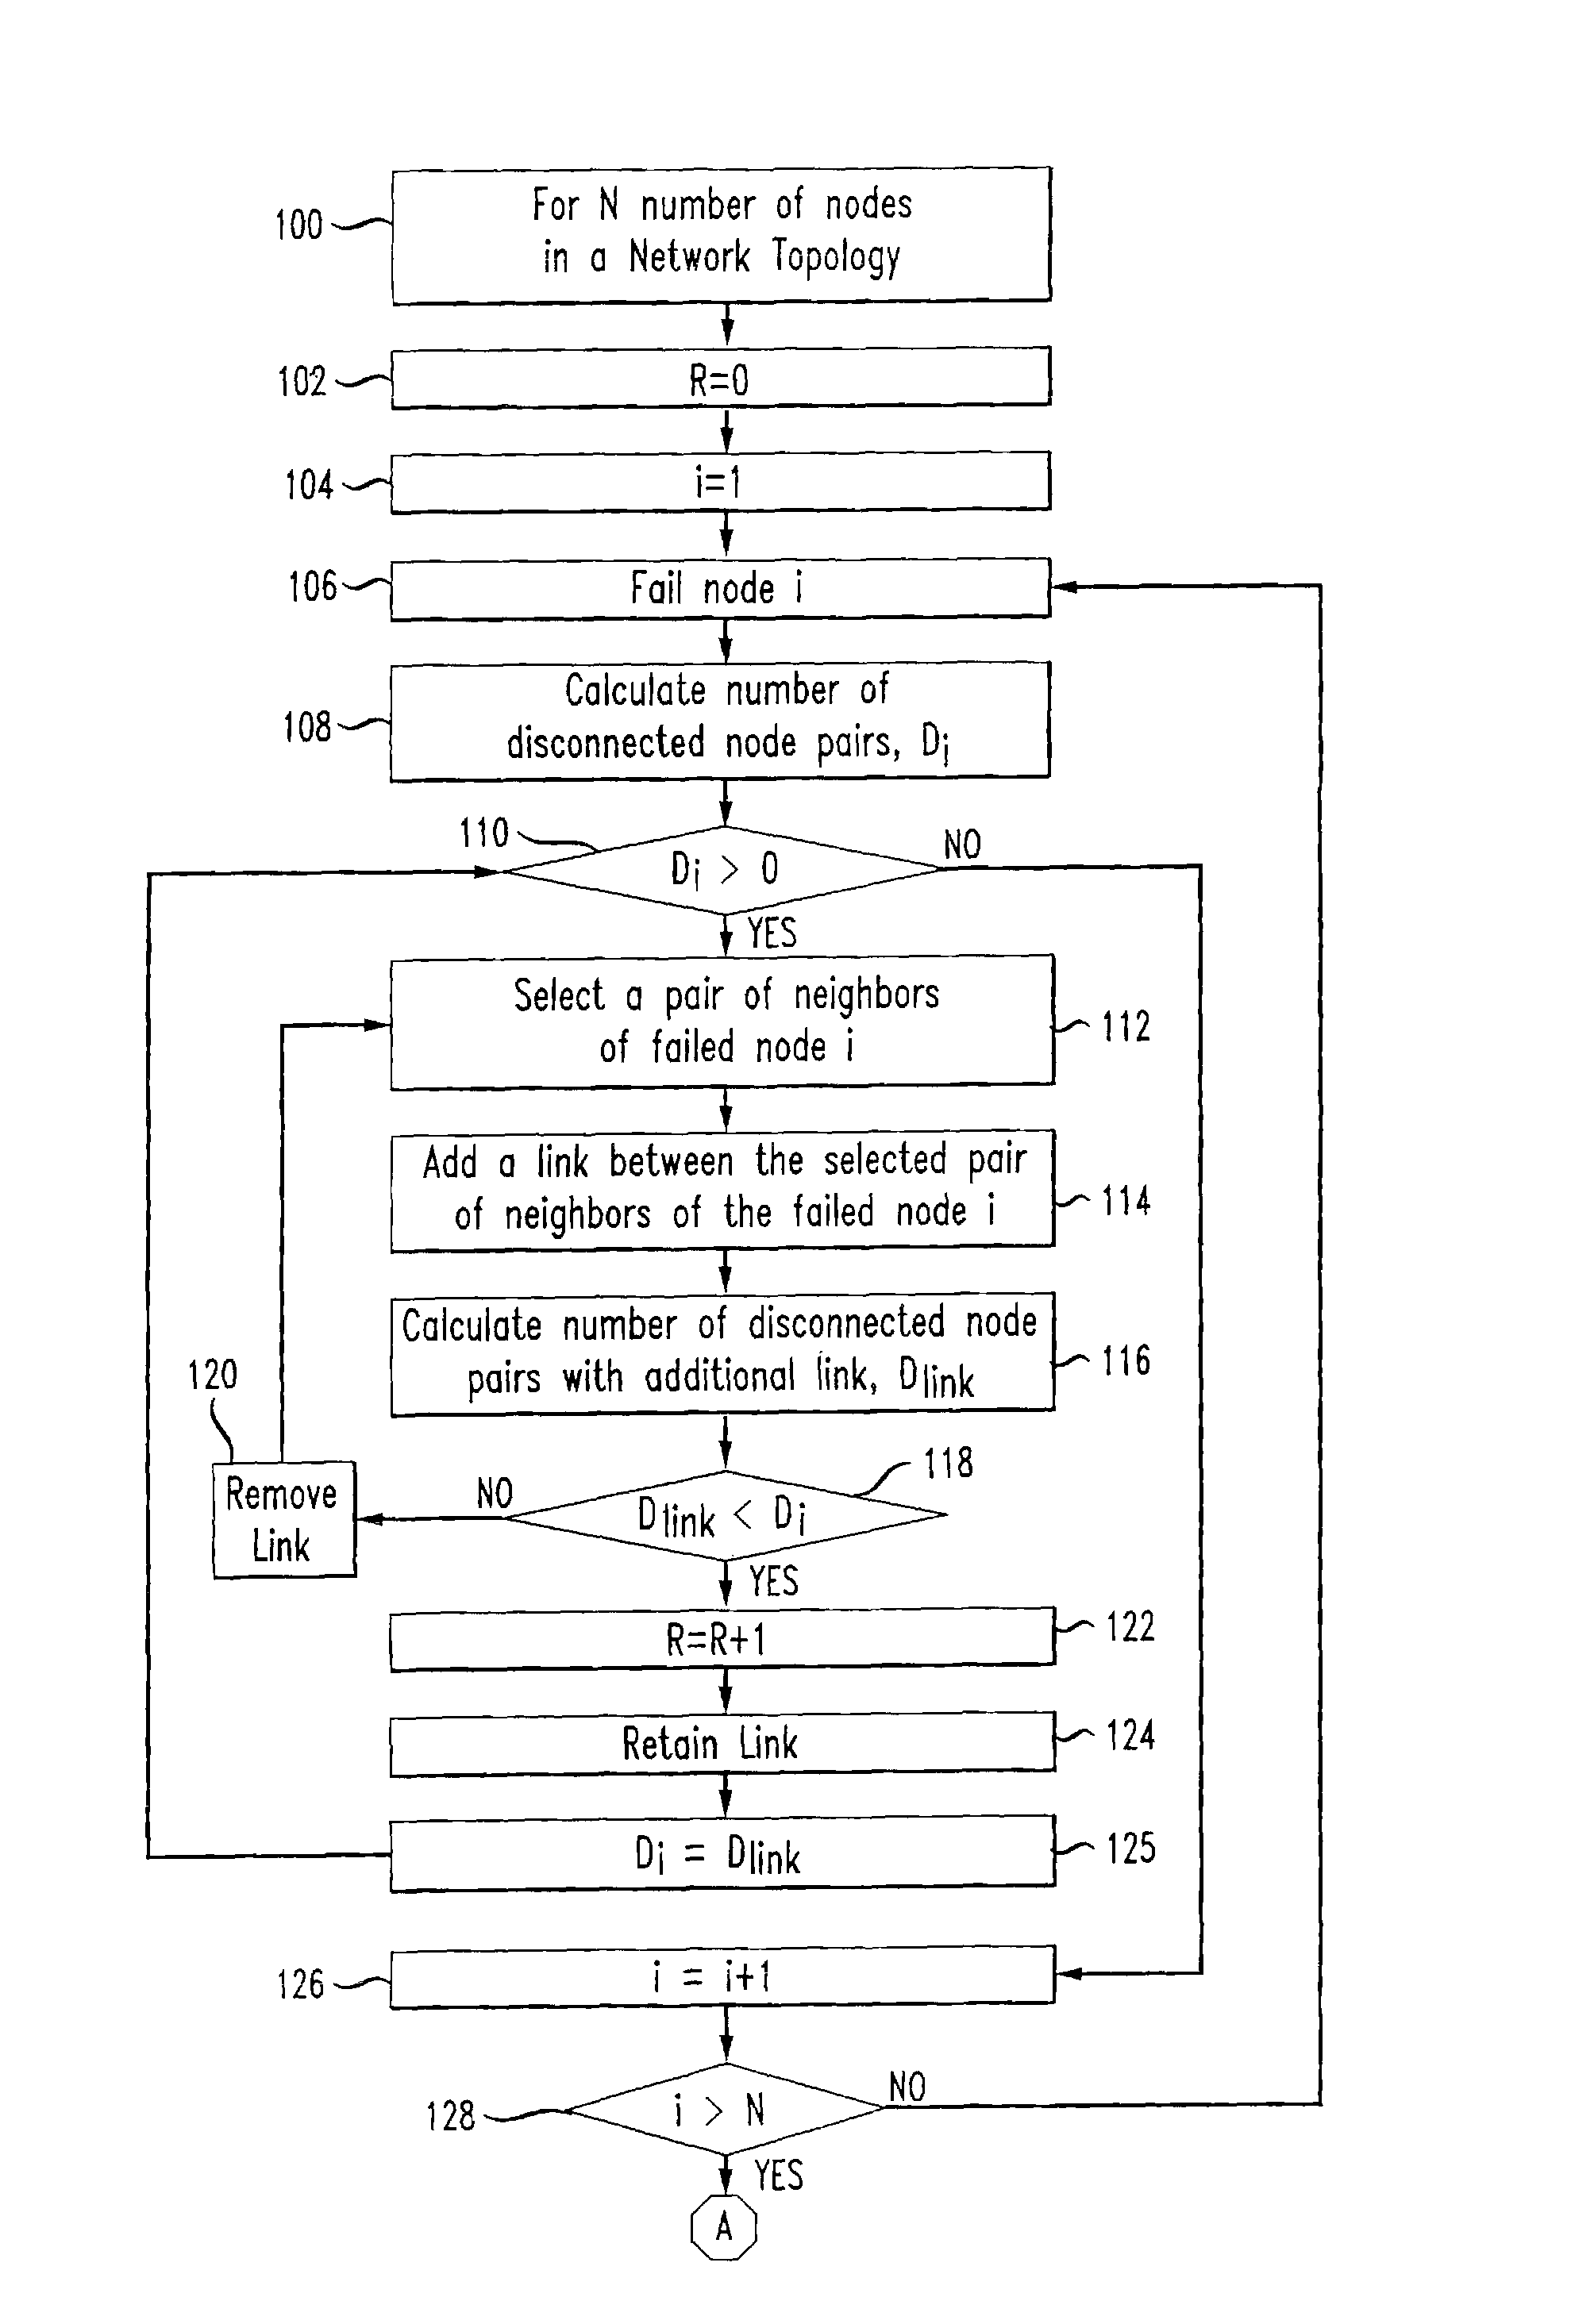 Method and apparatus for increasing survivability in IP networks